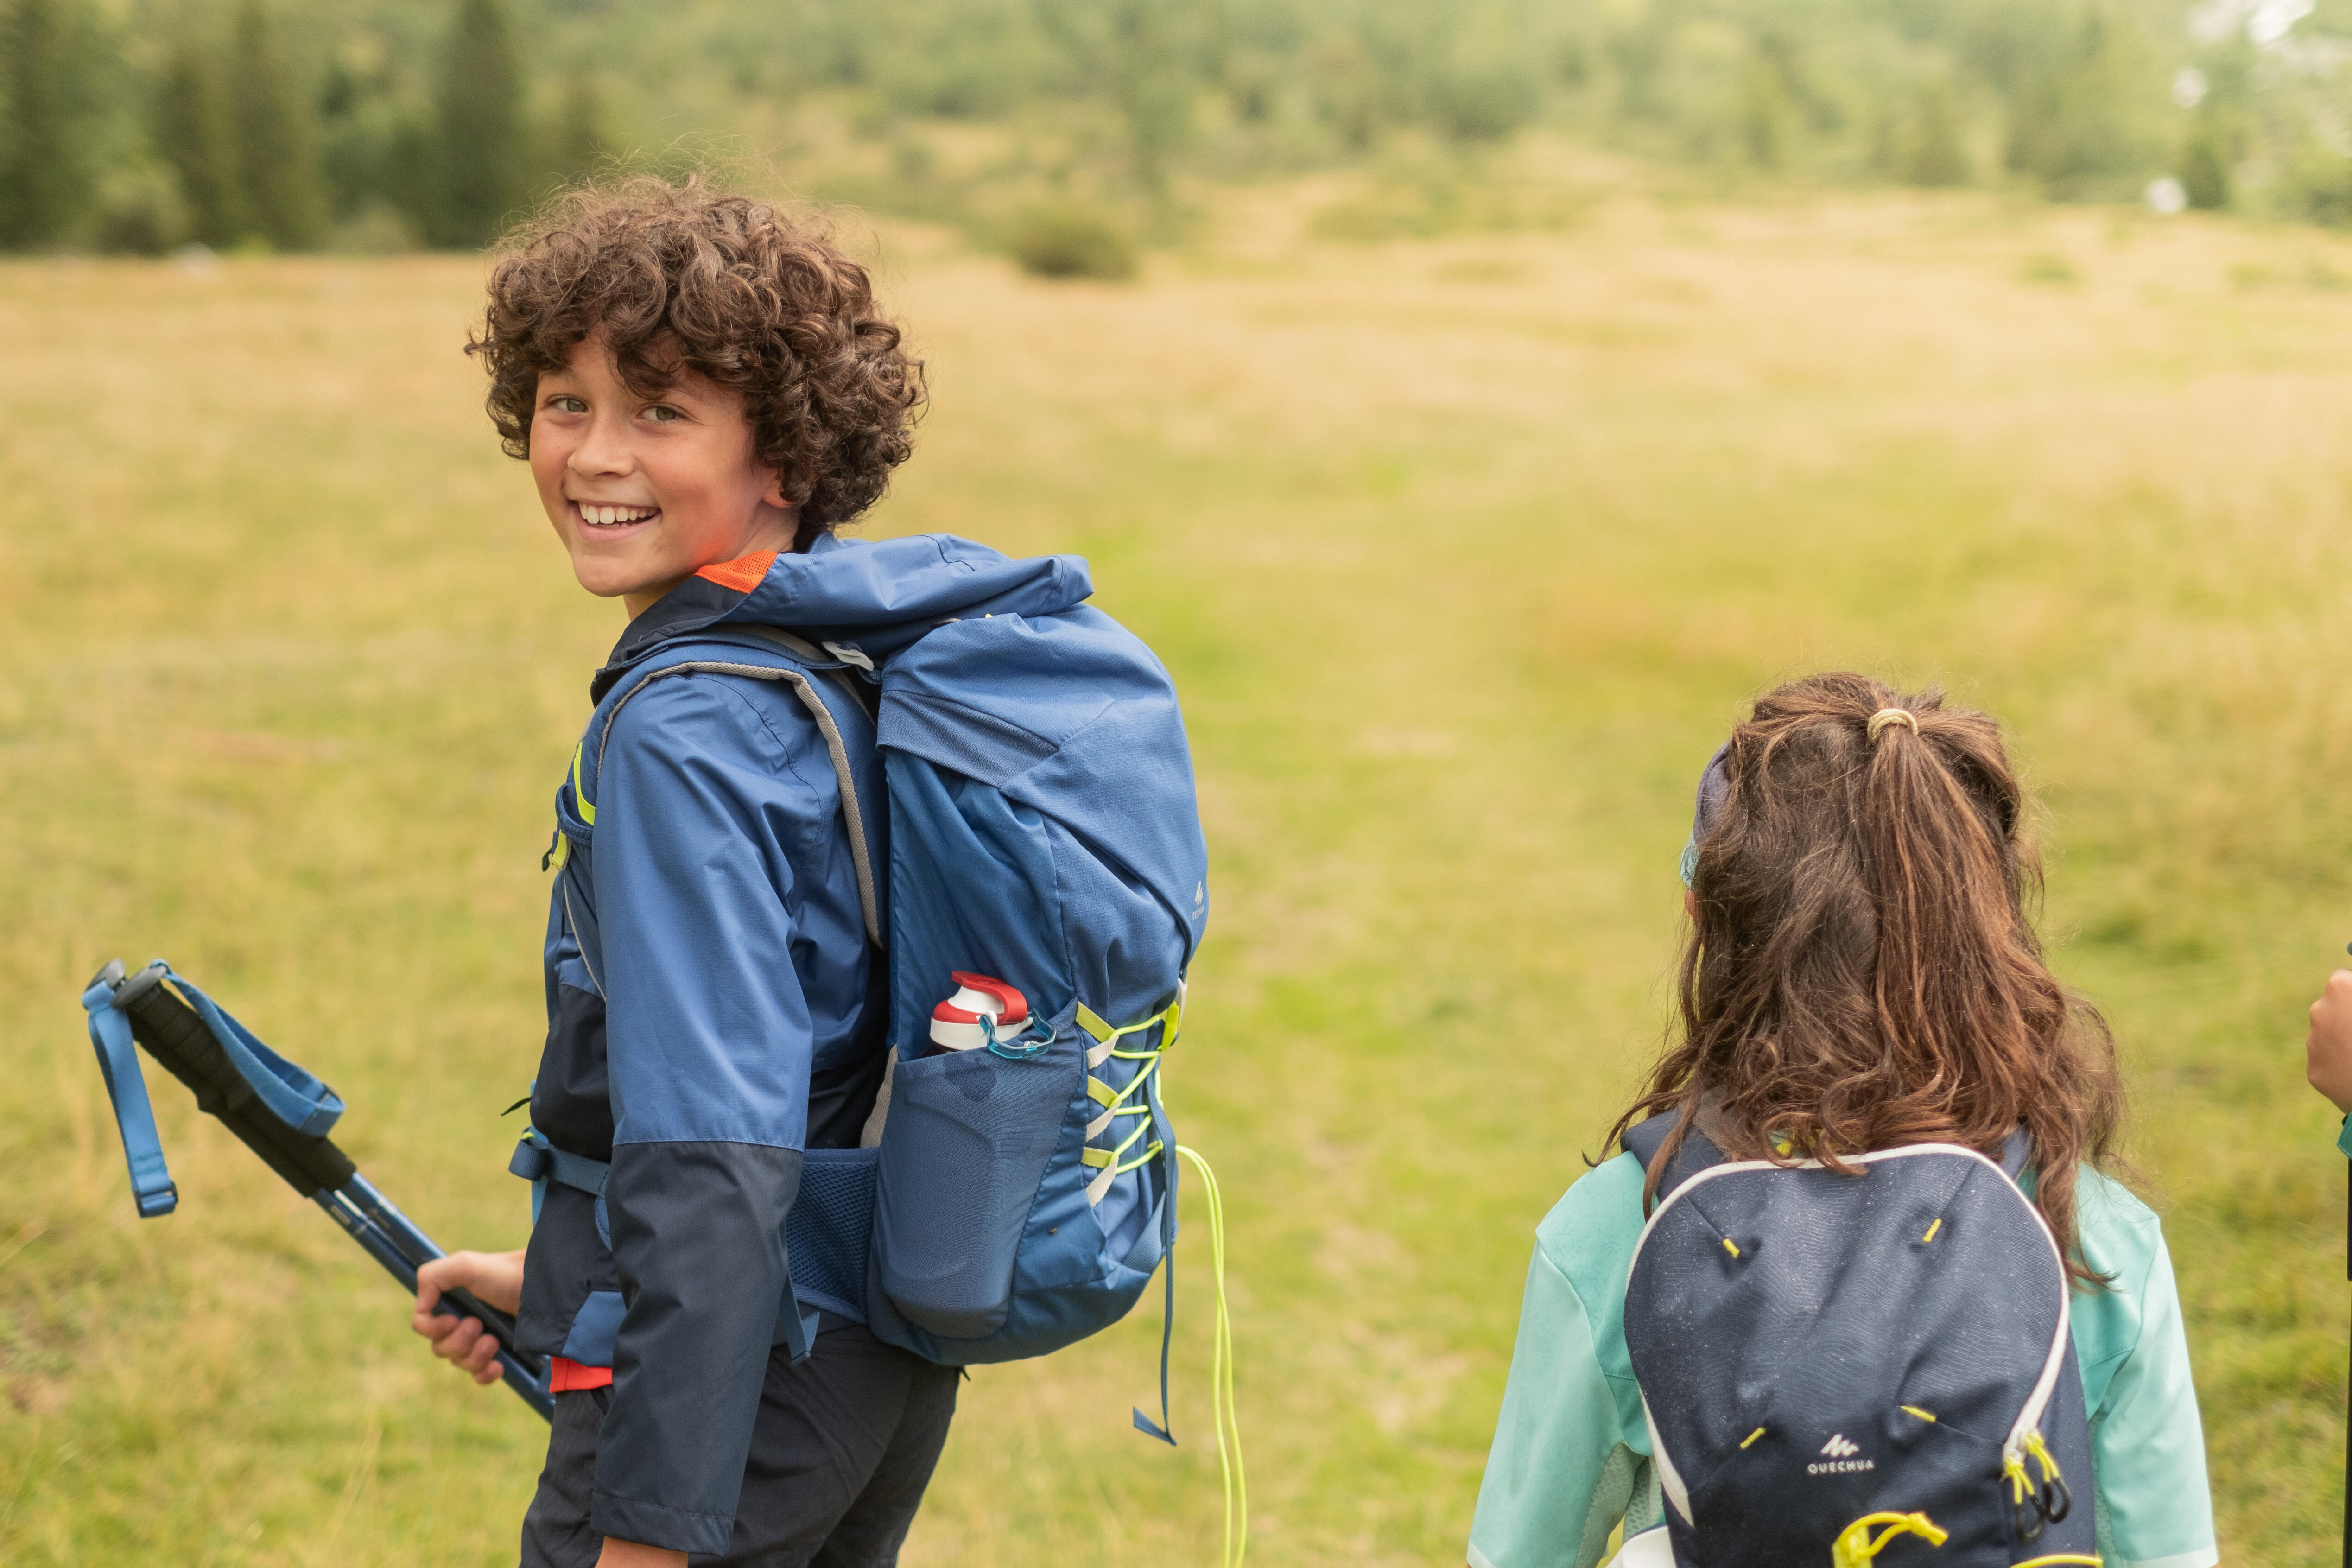 How to choose your kids’ hiking backpack?